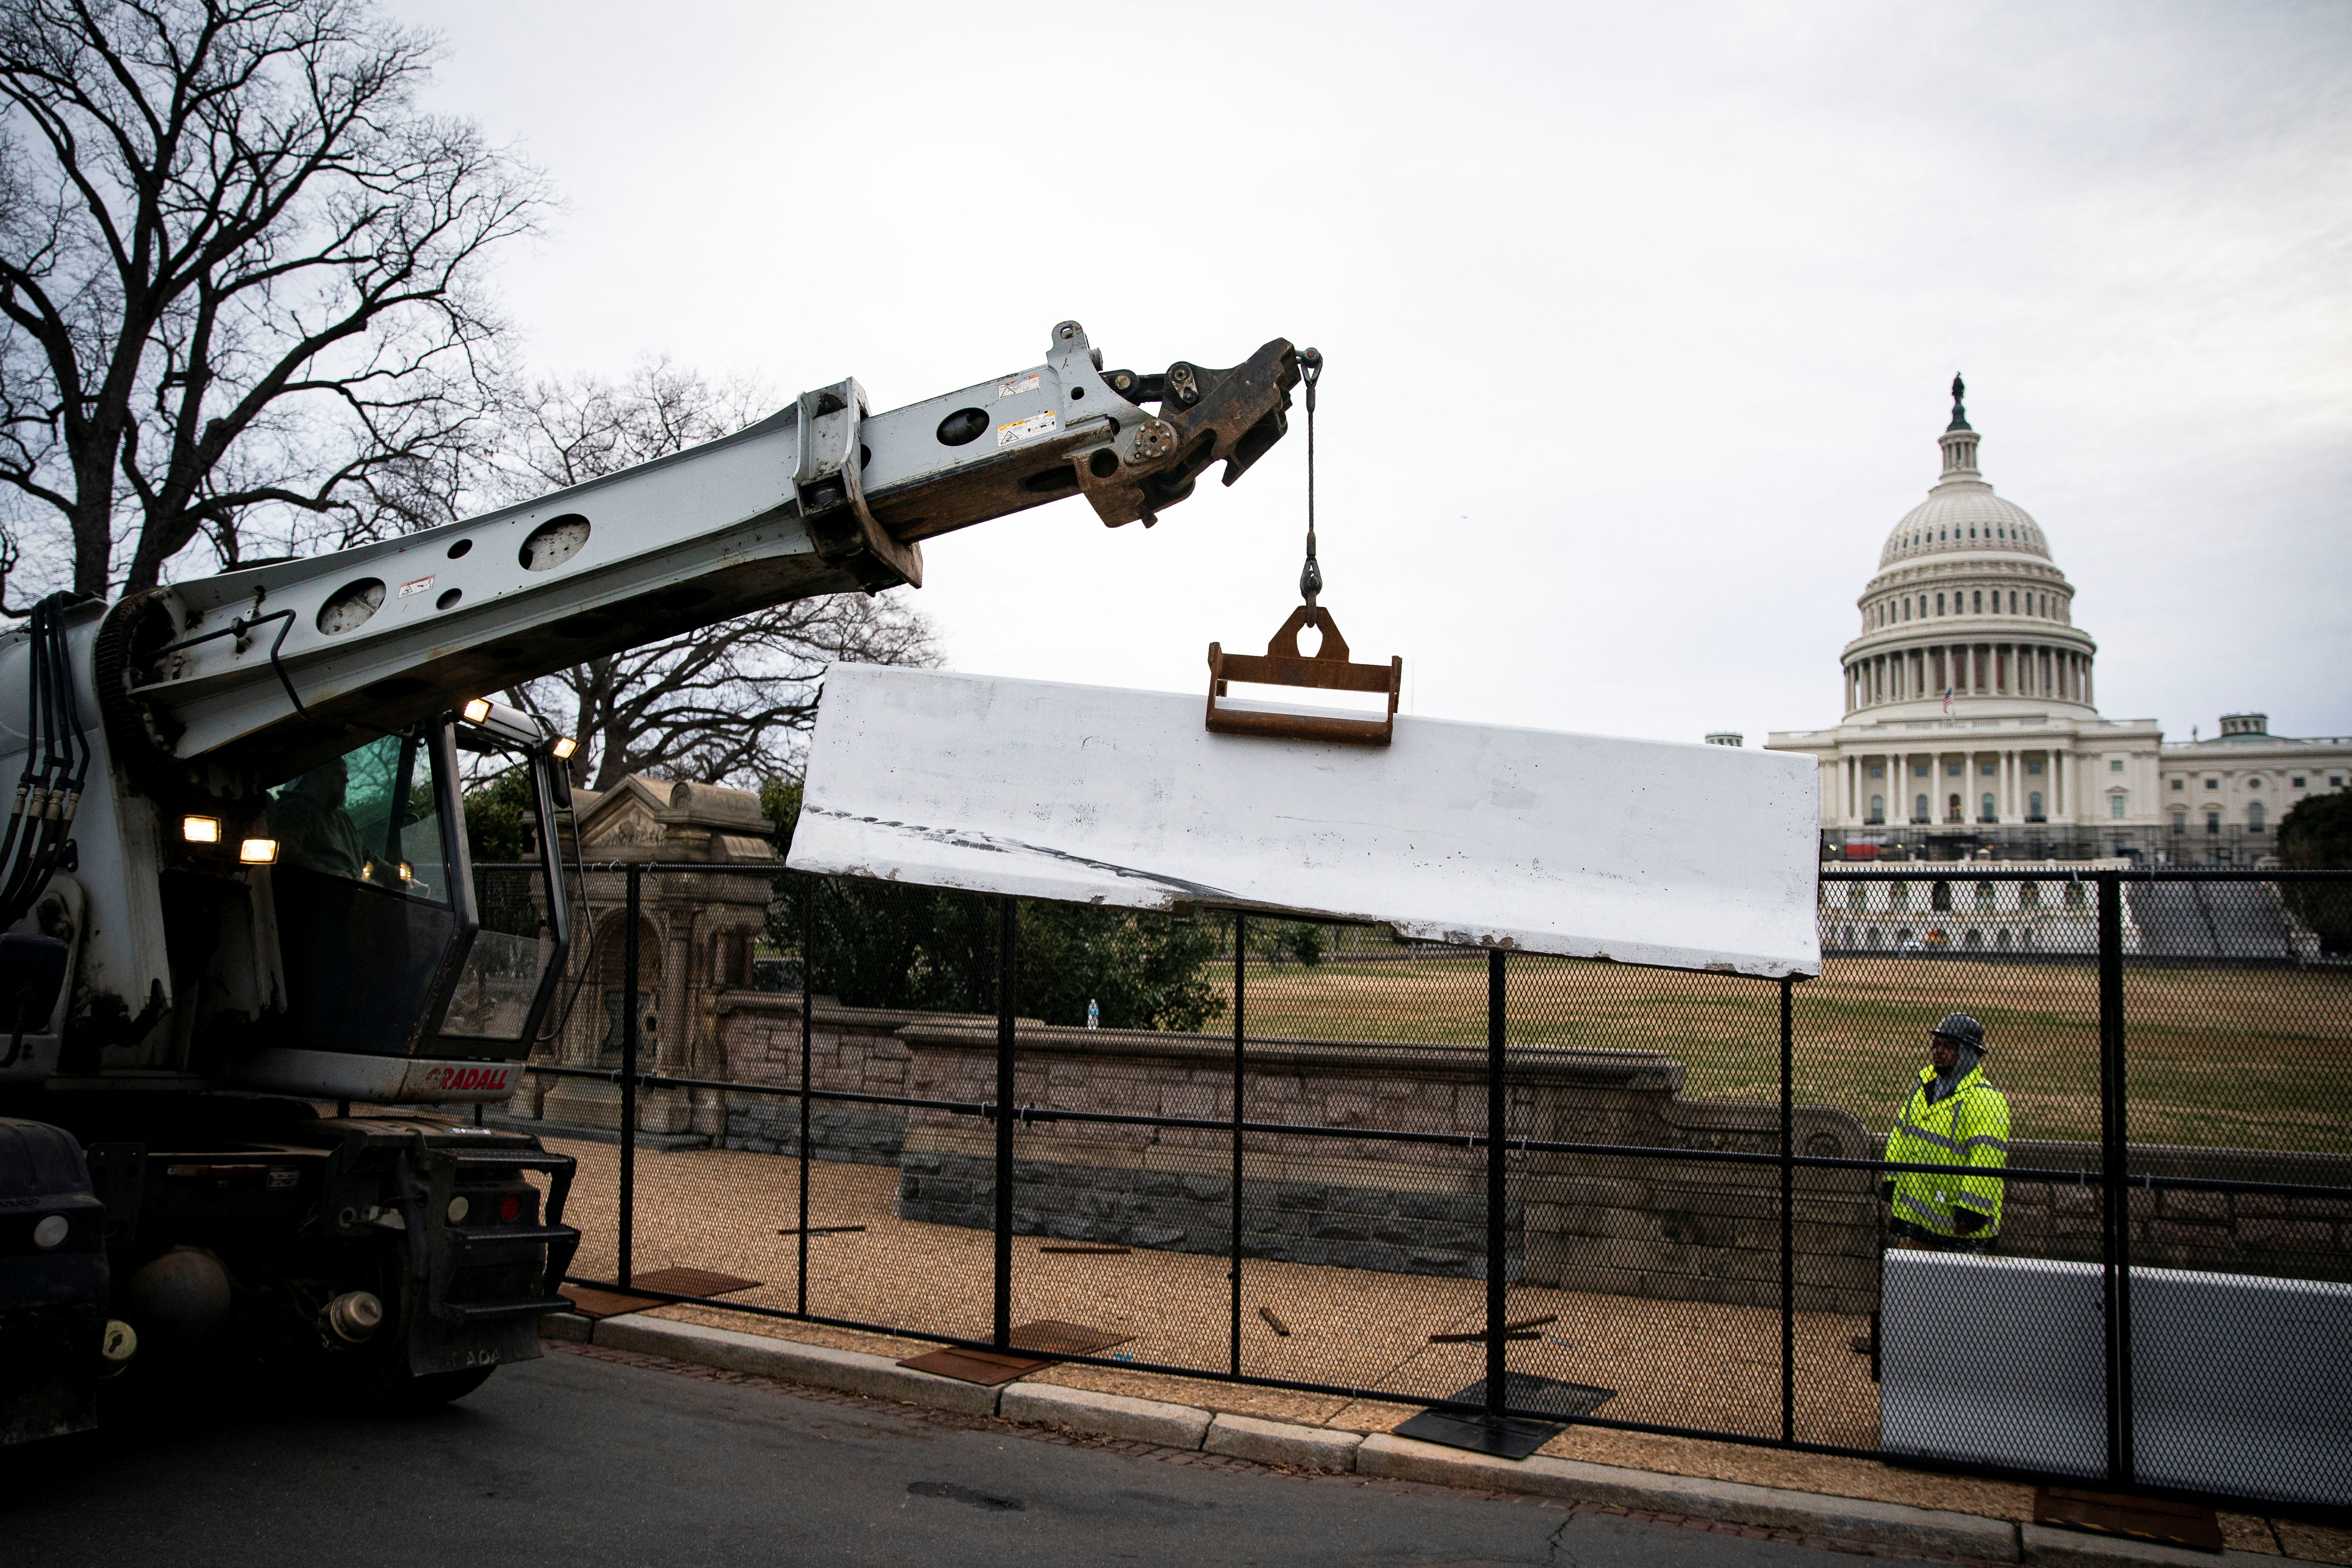 Workers install security fencing around the perimeter of the U.S. Capitol, ahead of the upcoming State of the Union with U.S. President Joe Biden